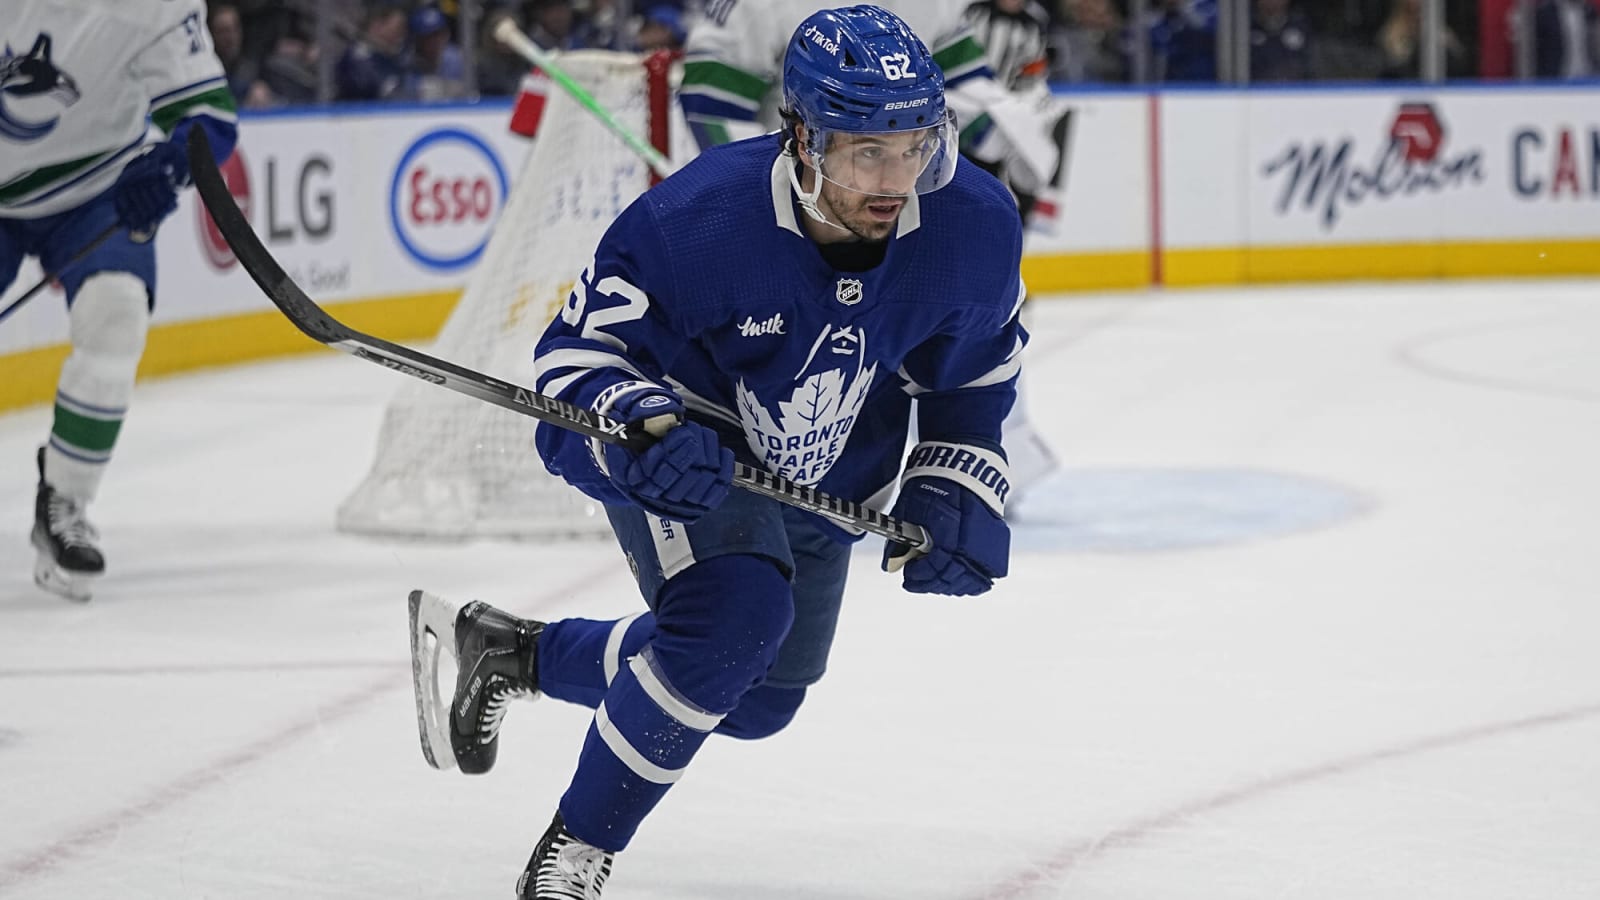 Analyzing the Leafs/Avs Trade: Denis Malgin for Dryden Hunt